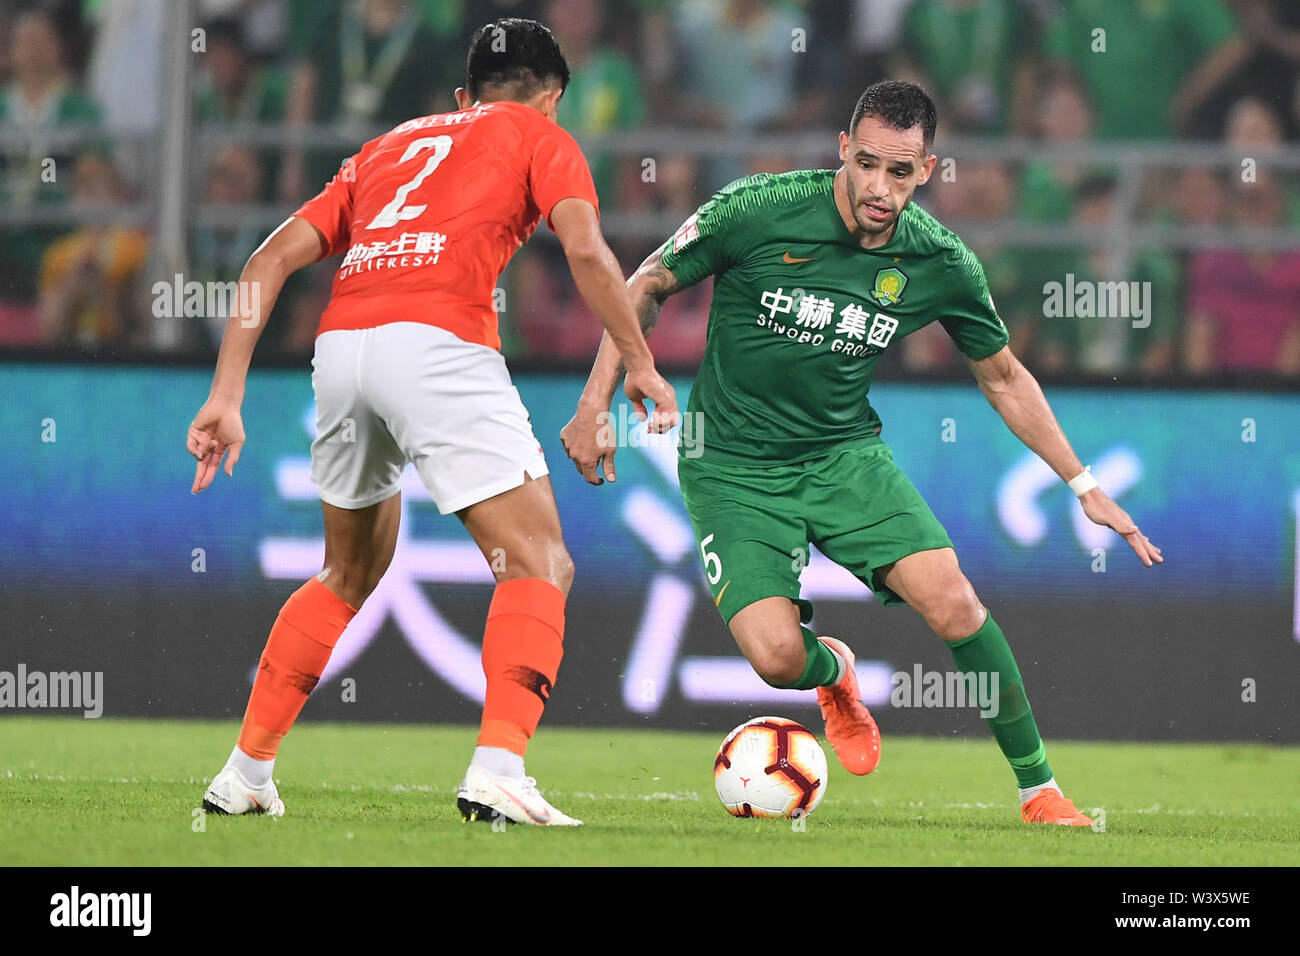 Brazilian football player Renato Soares de Oliveira Augusto, or simply Renato Augusto, right, of Beijing Sinobo Guoan passes the ball against a player of Beijing Renhe in their 18th round match during the 2019 Chinese Football Association Super League (CSL) in Beijing, China, 17 July 2019. Beijing Sinobo Guoan defeated Beijing Renhe 2-1. Stock Photo